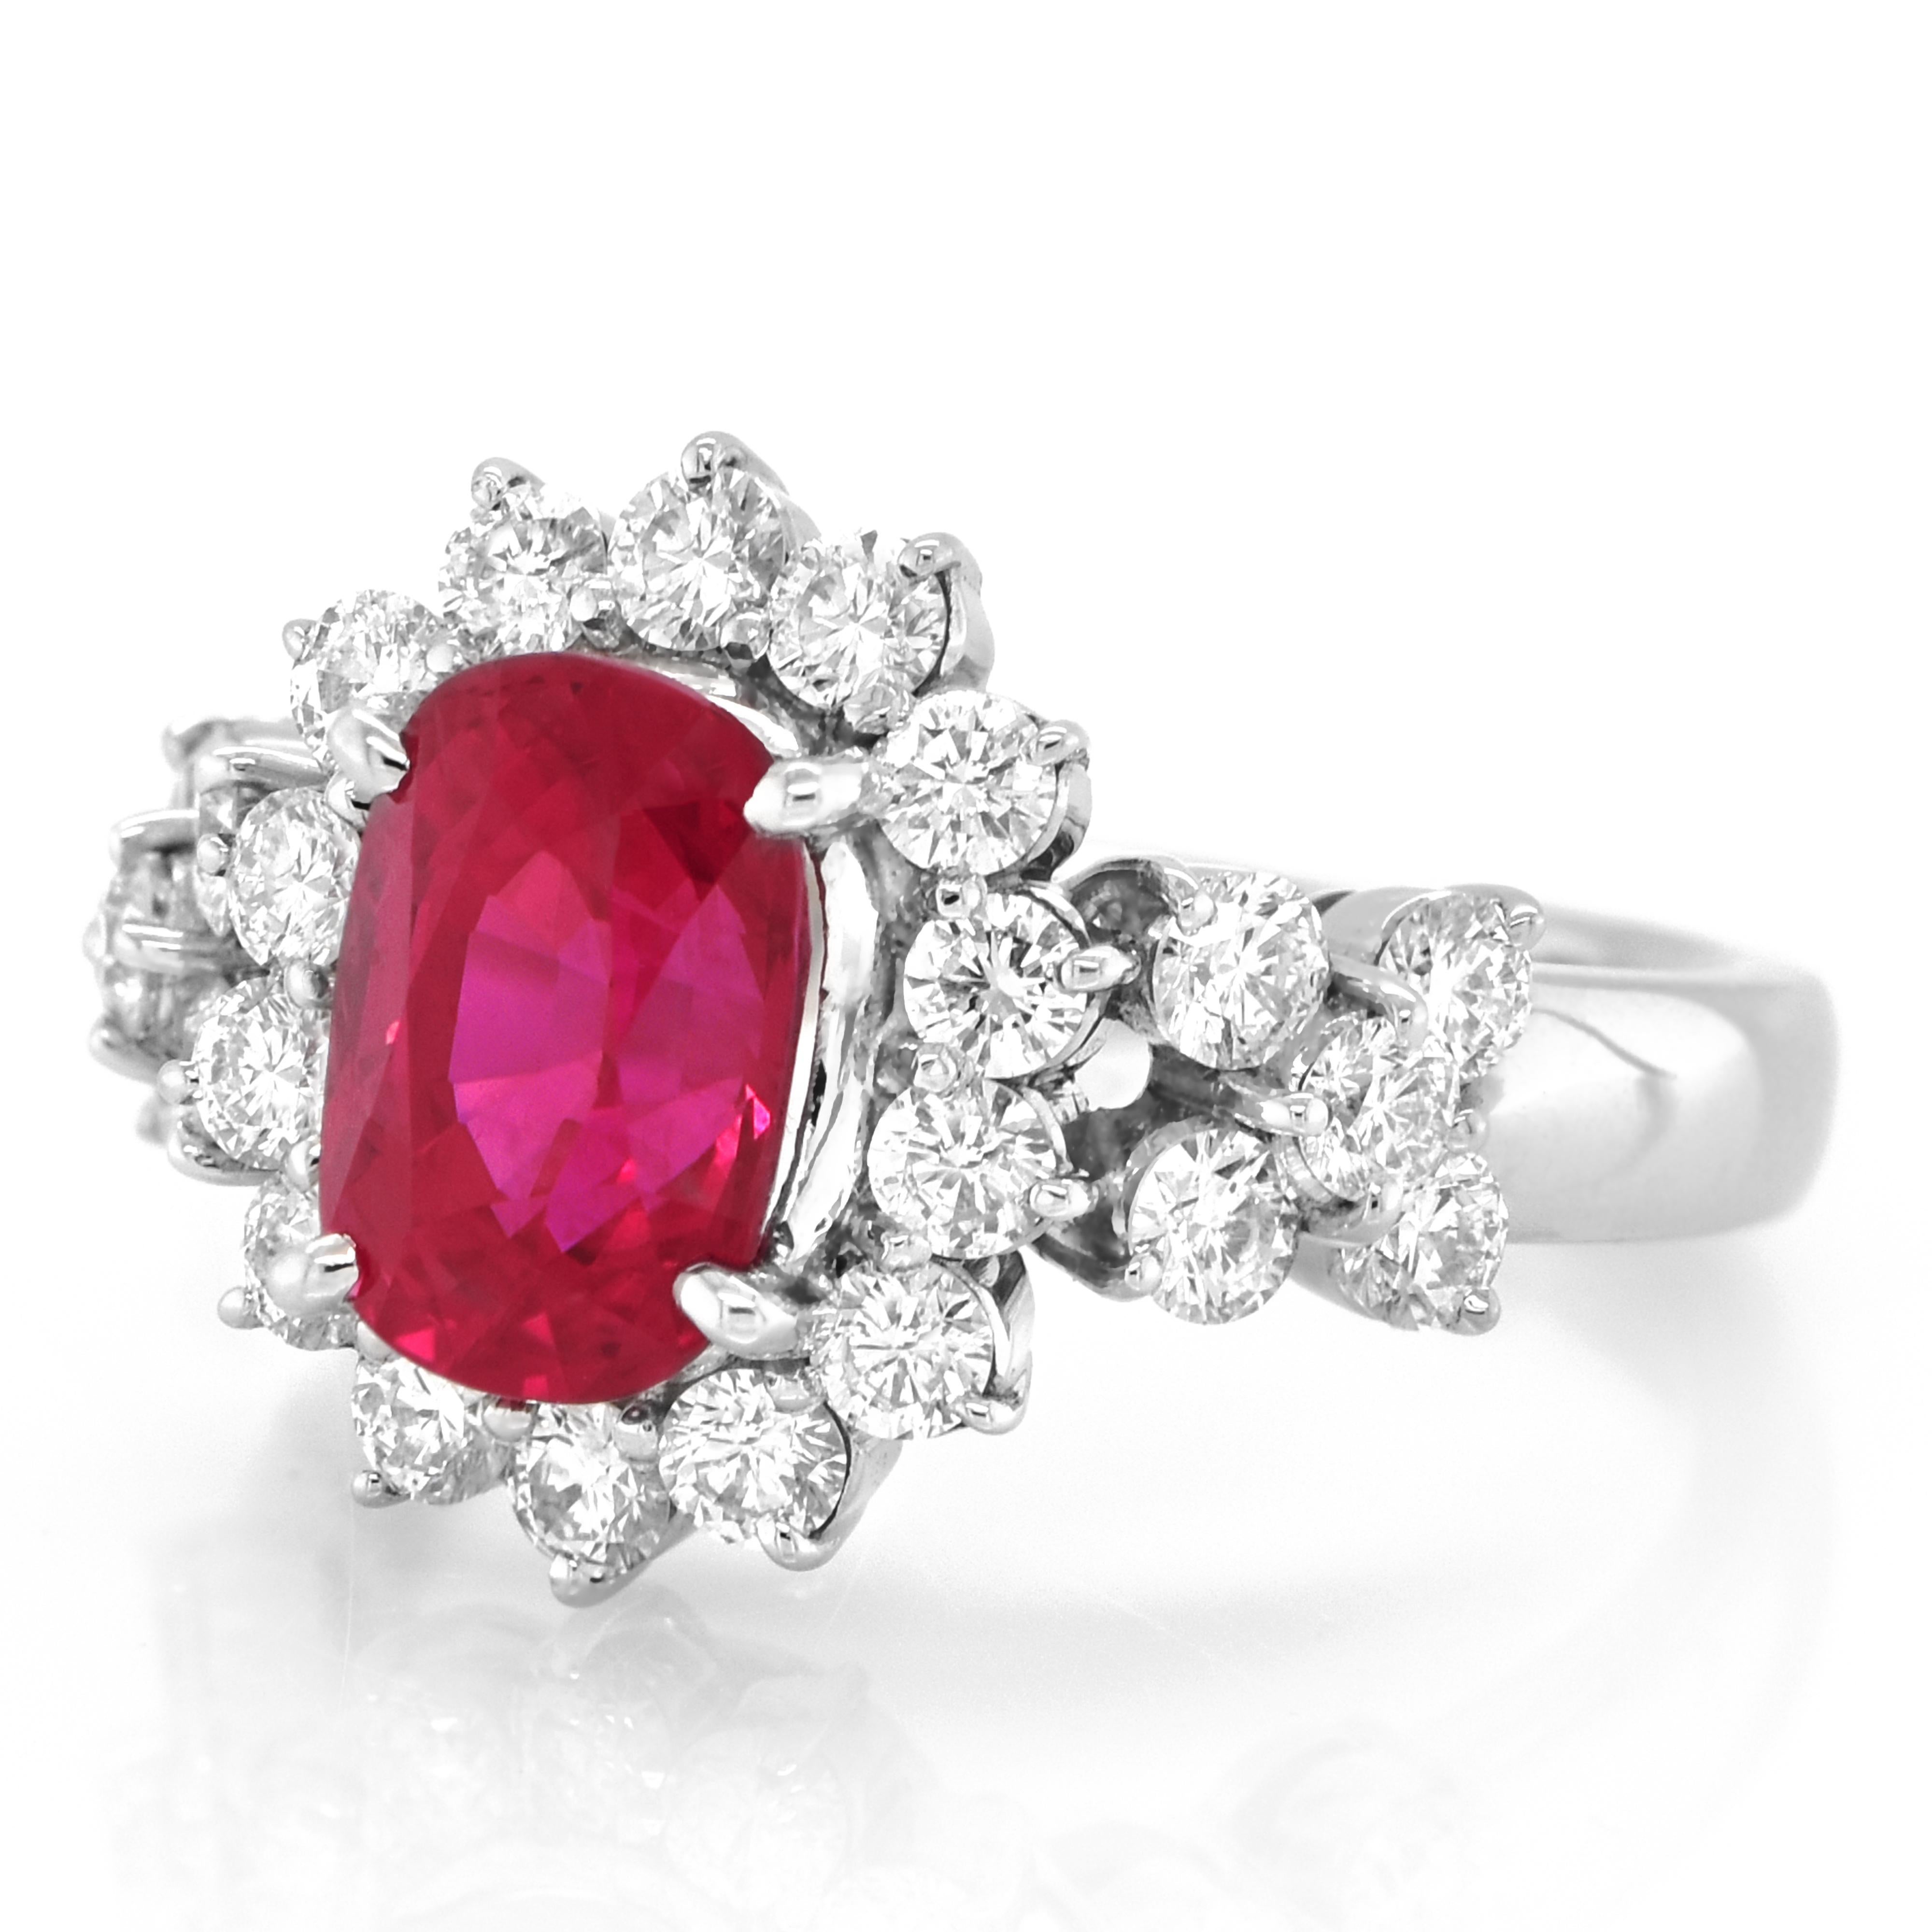 A beautiful ring set in Platinum featuring GIA Certified 3.08 Carat Natural Mozambique Ruby and 1.23 Carat Diamonds. Rubies are referred to as 